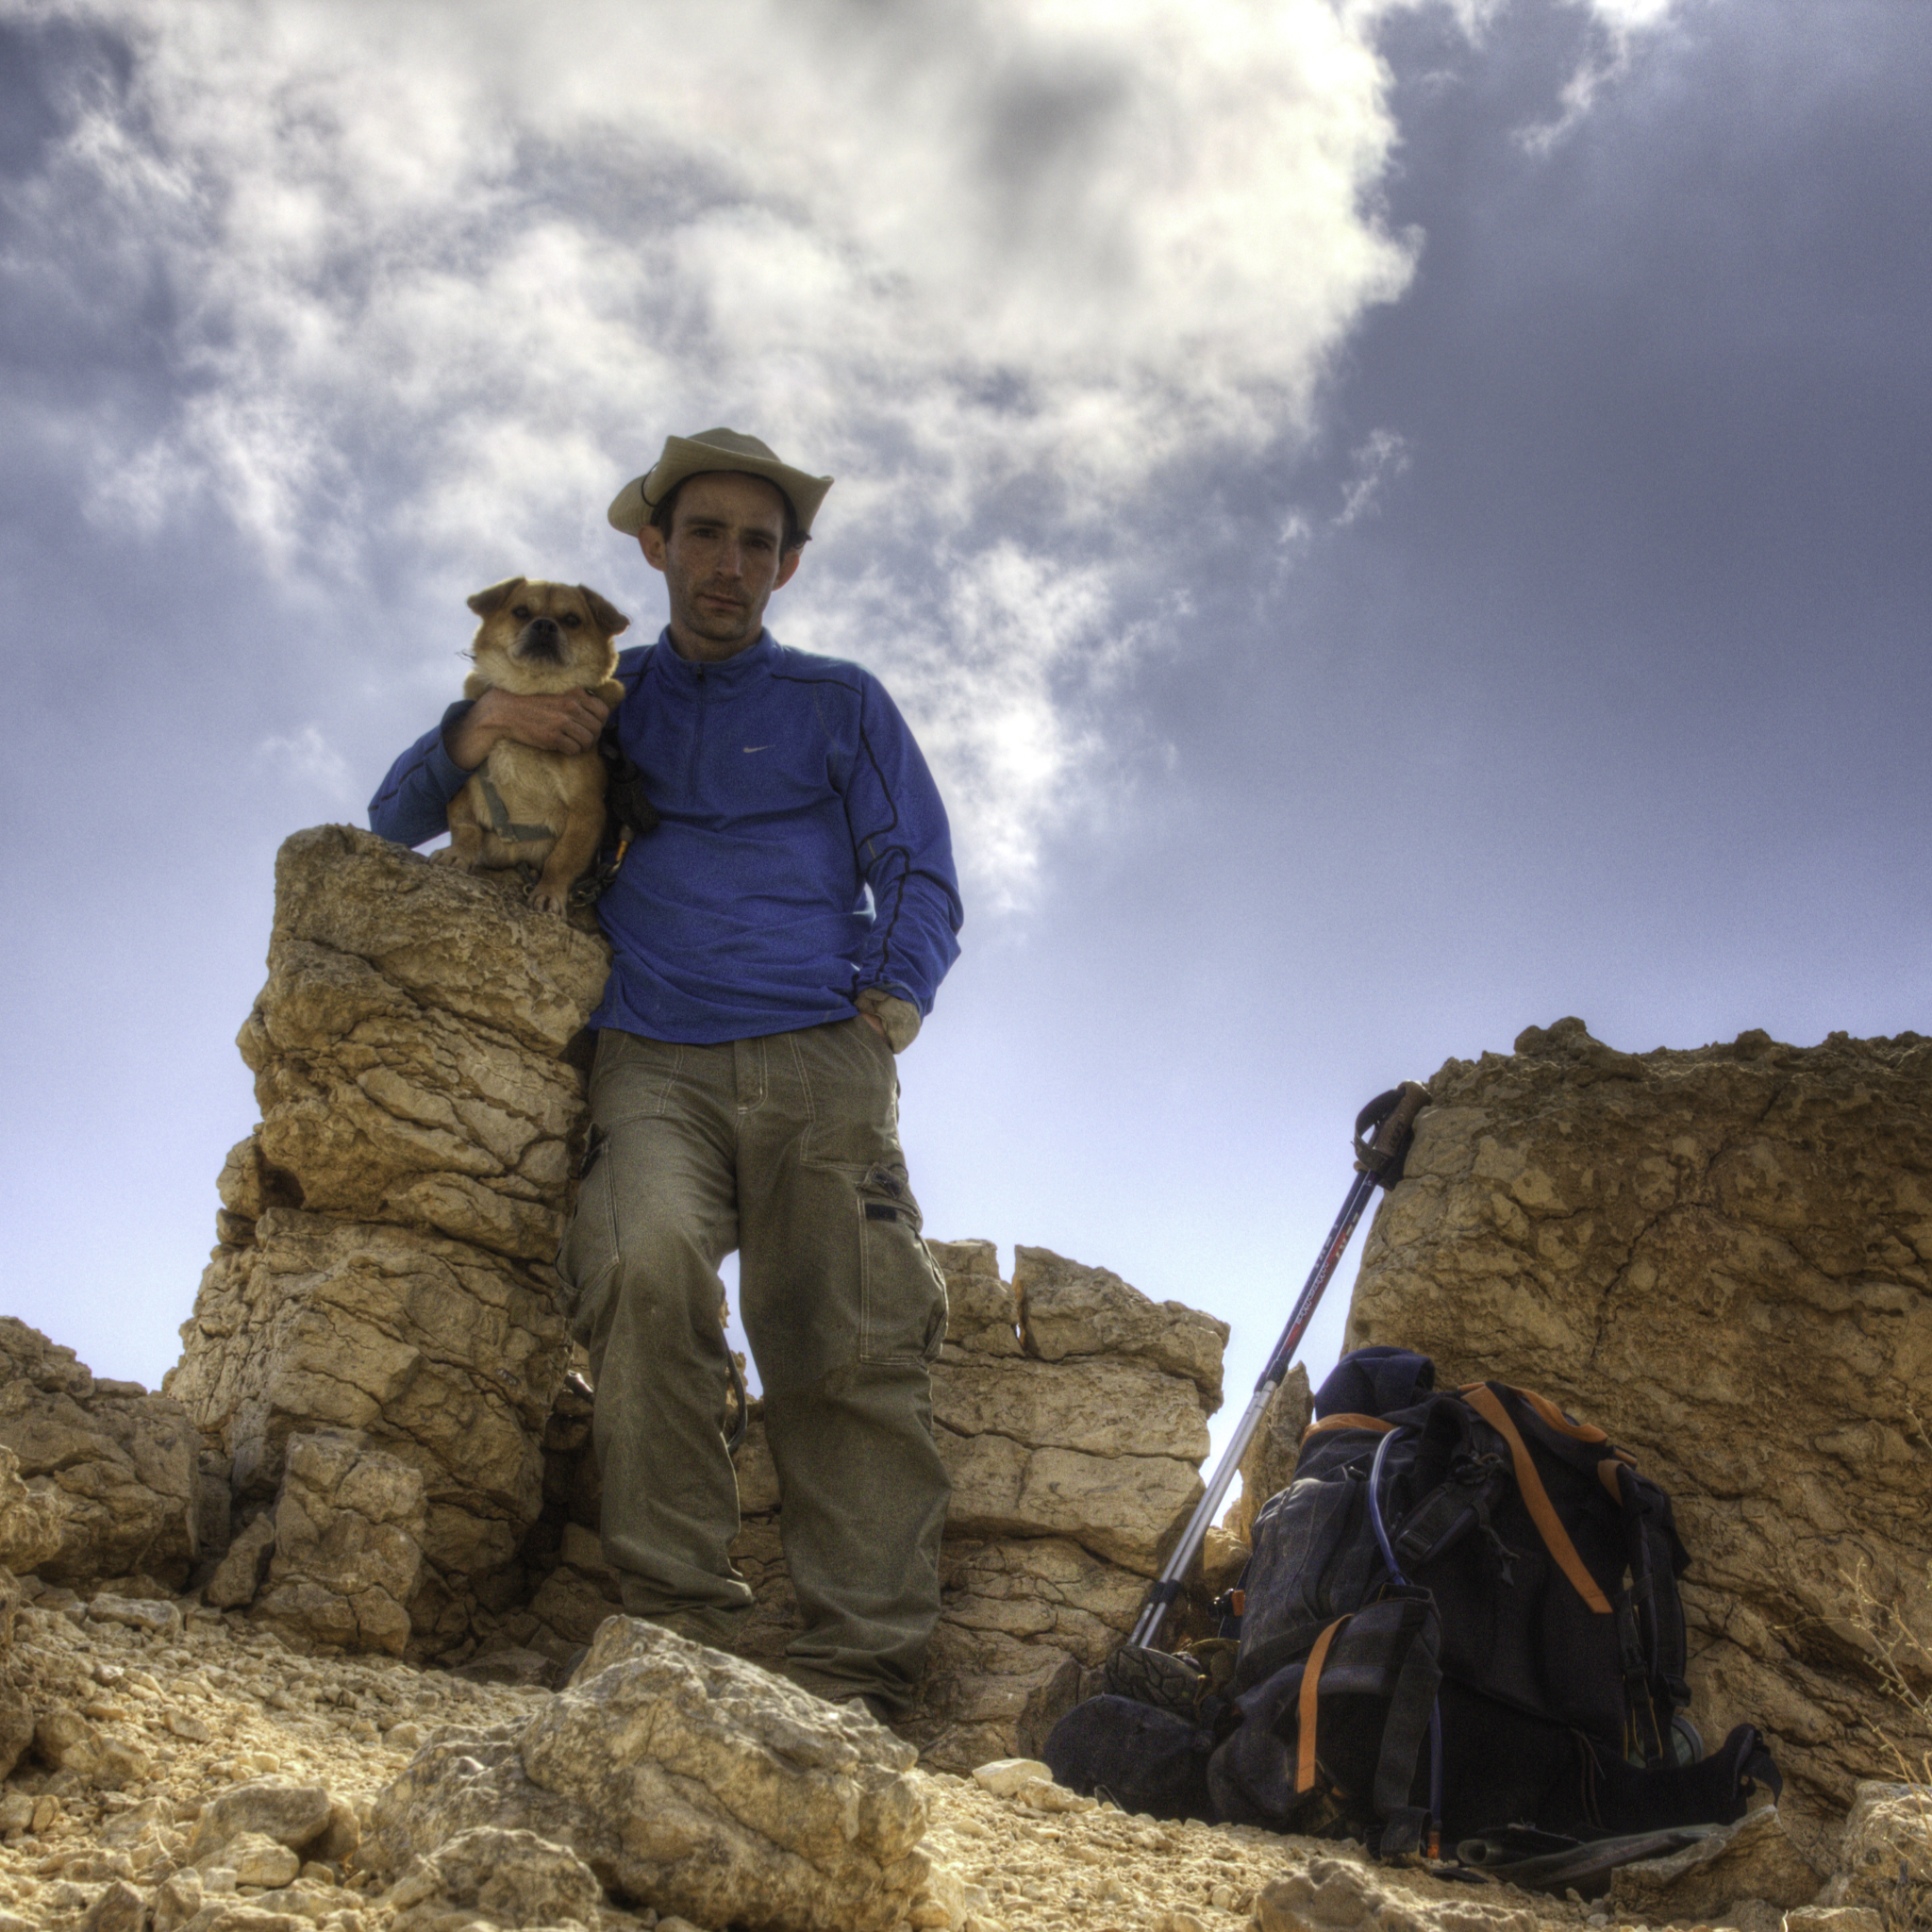 Assaf and his trusty companion Booli posing together atop a rocky crest